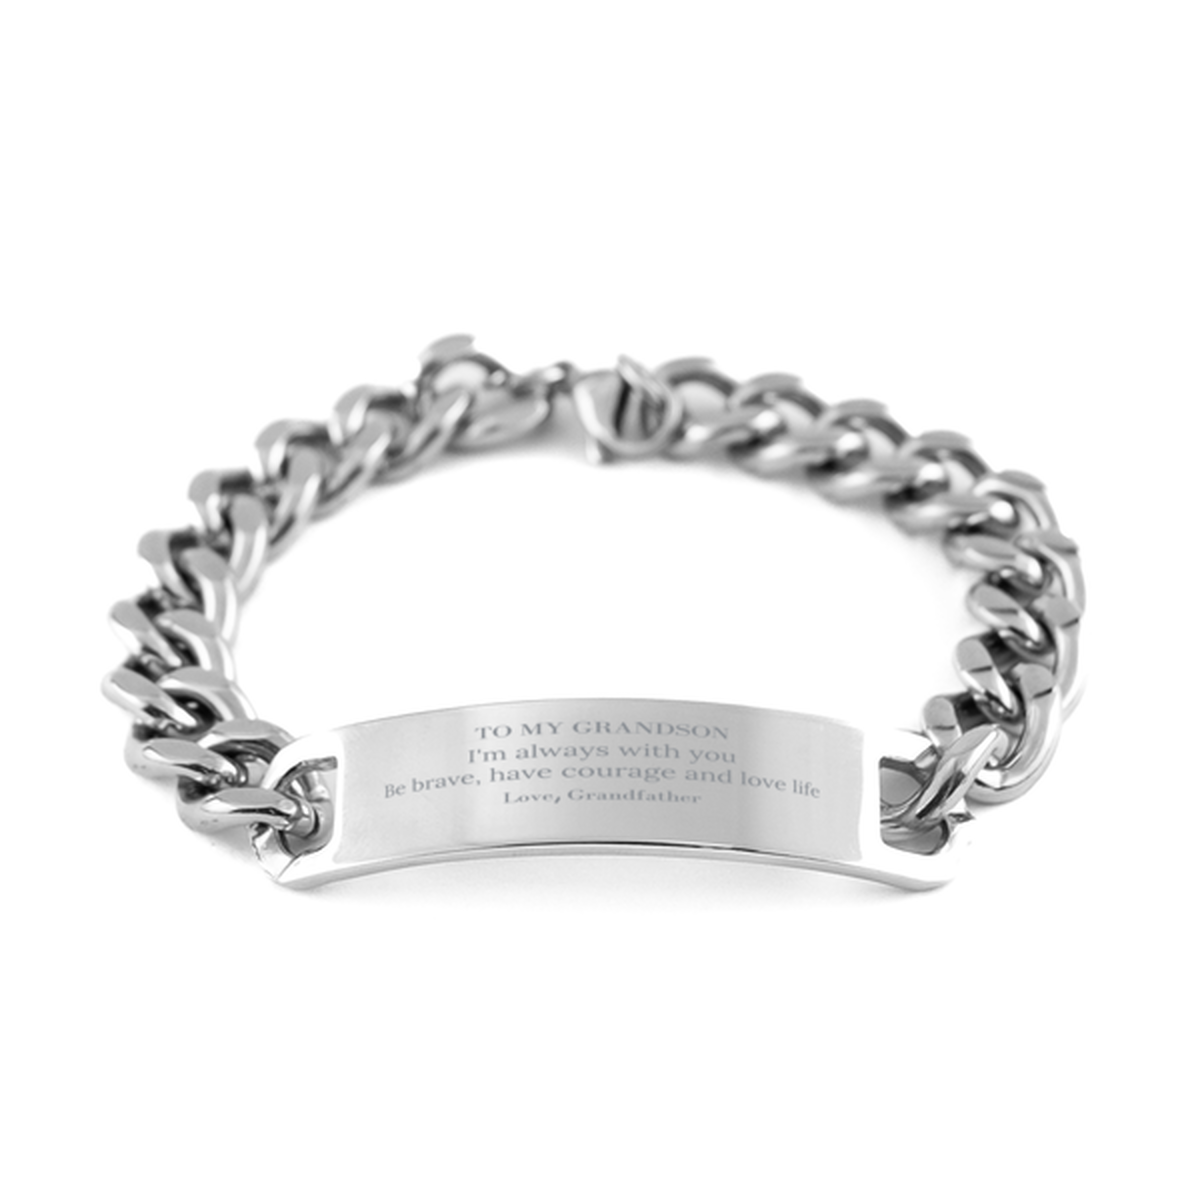 To My Grandson Gifts from Grandfather, Unique Cuban Chain Stainless Steel Bracelet Inspirational Christmas Birthday Graduation Gifts for Grandson I'm always with you. Be brave, have courage and love life. Love, Grandfather